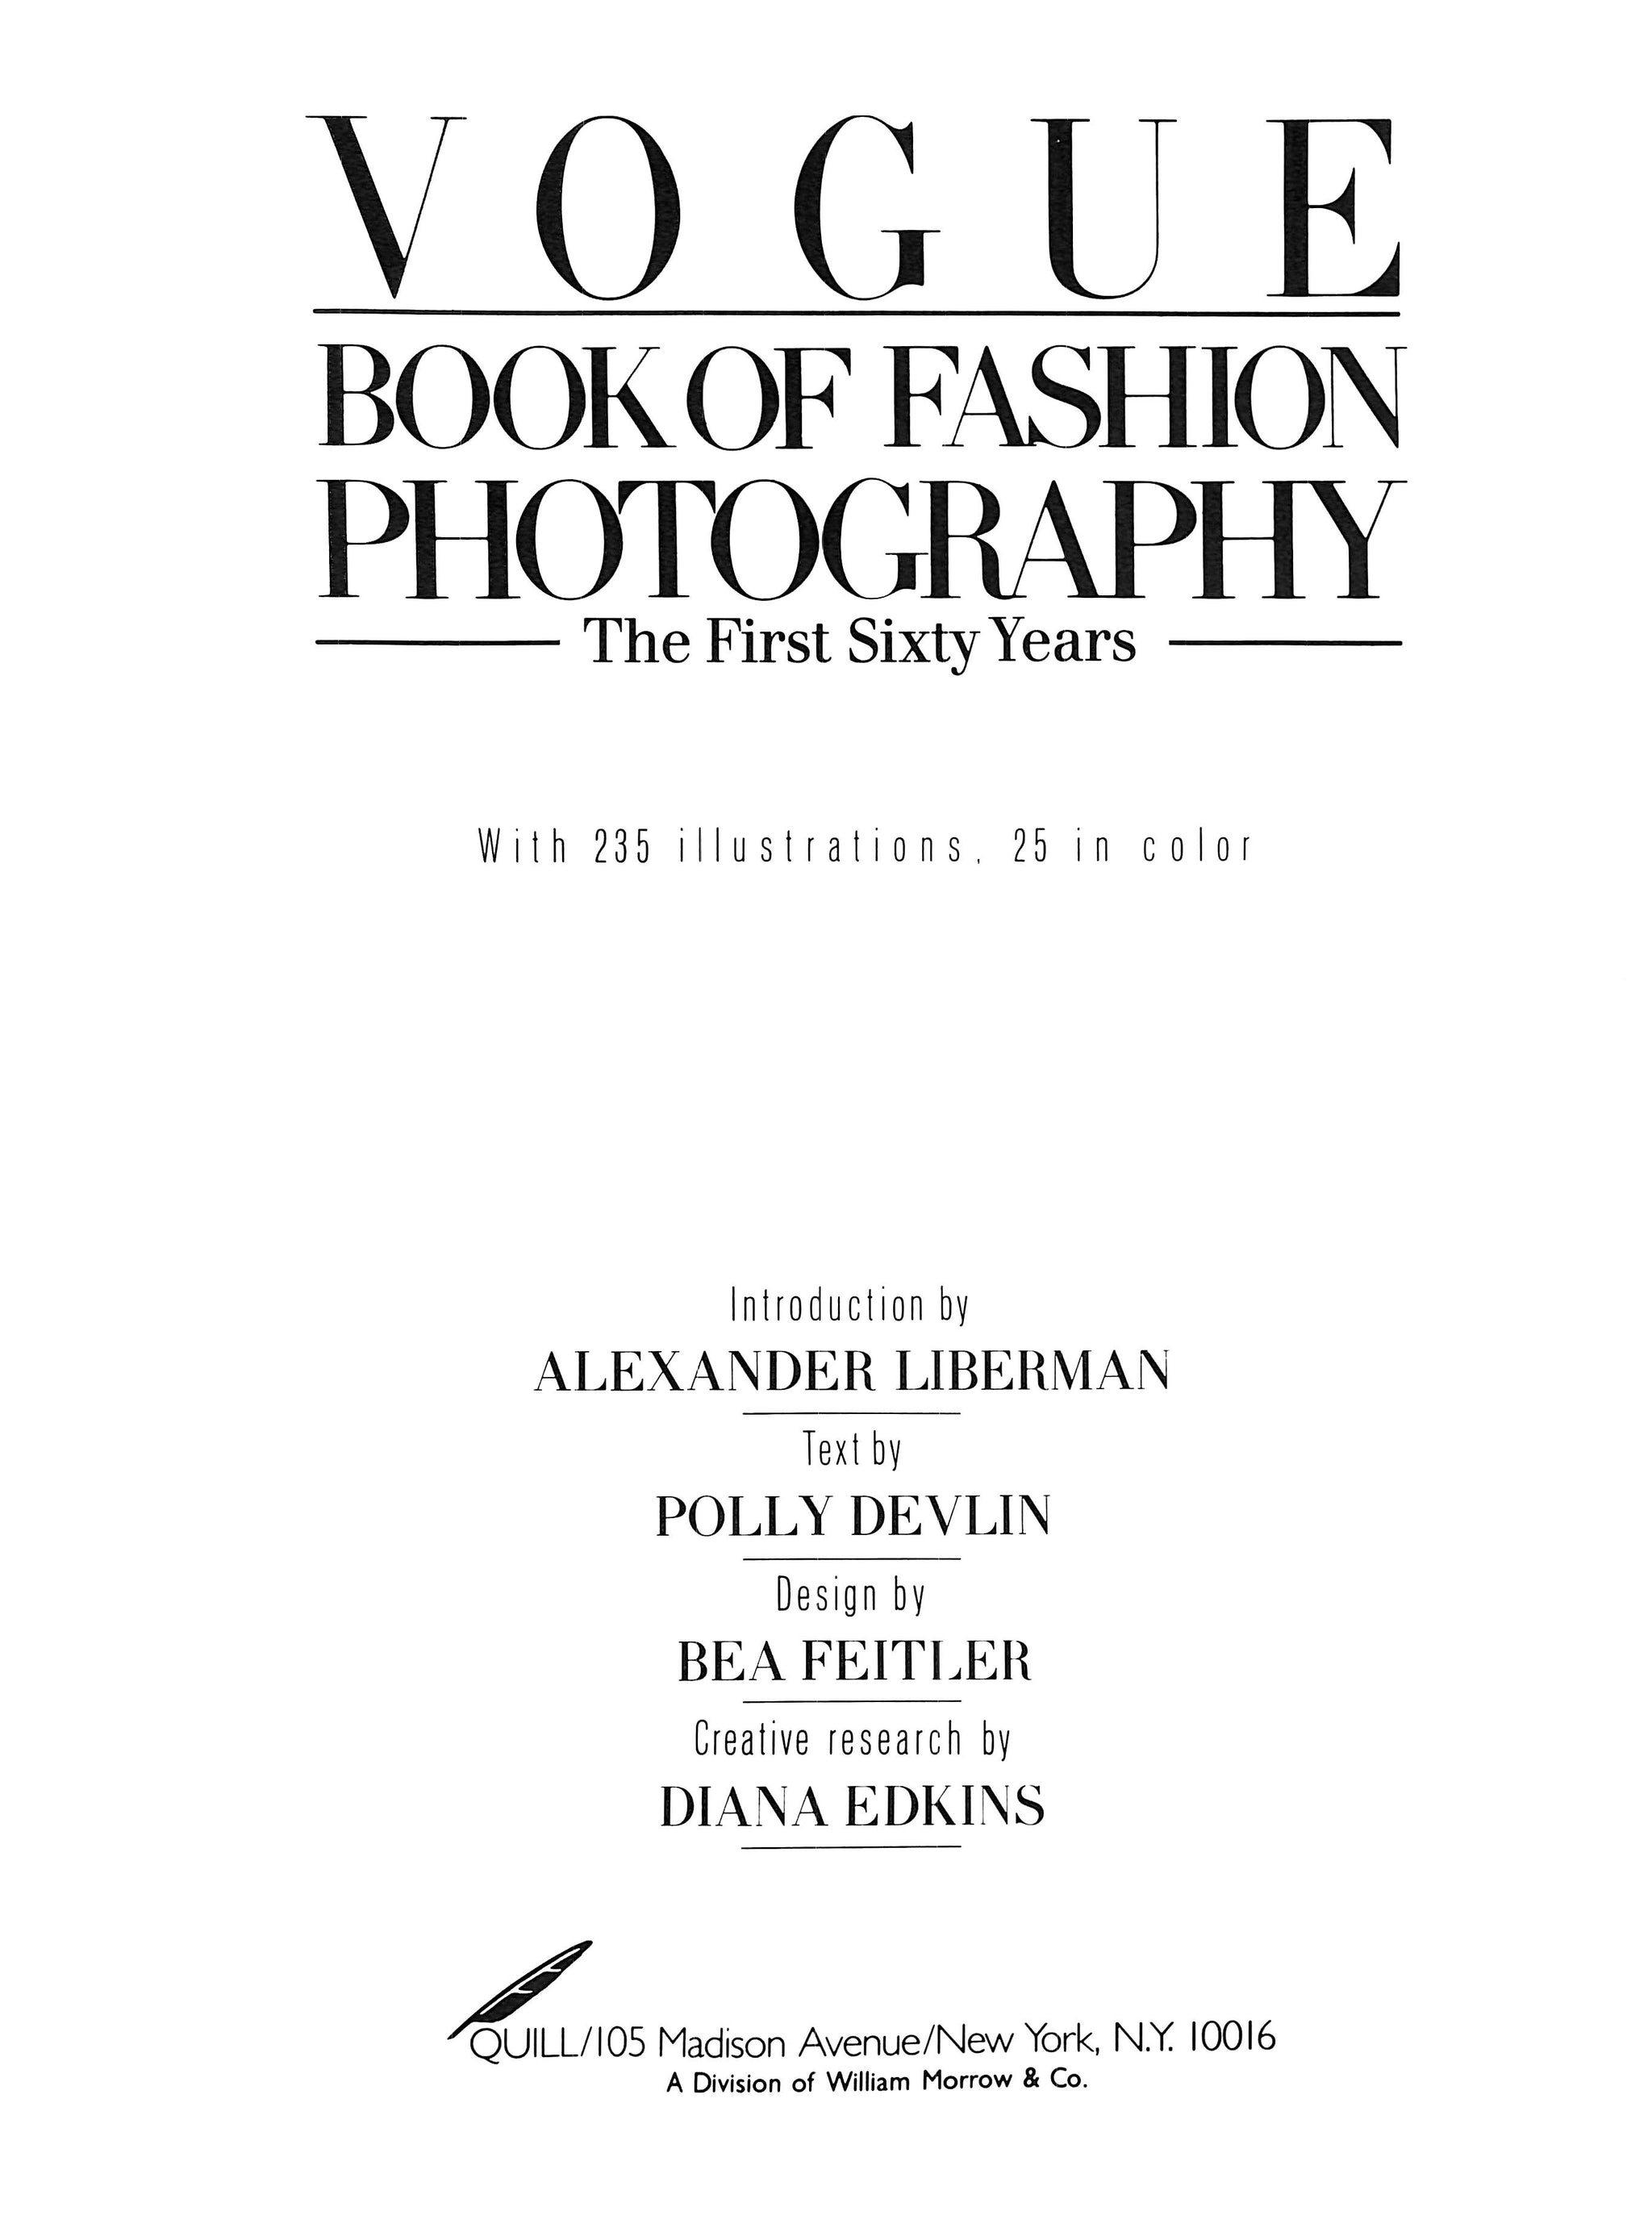 Vogue: Book Of Fashion Photography/ The First Sixty Years 1979 DEVLI